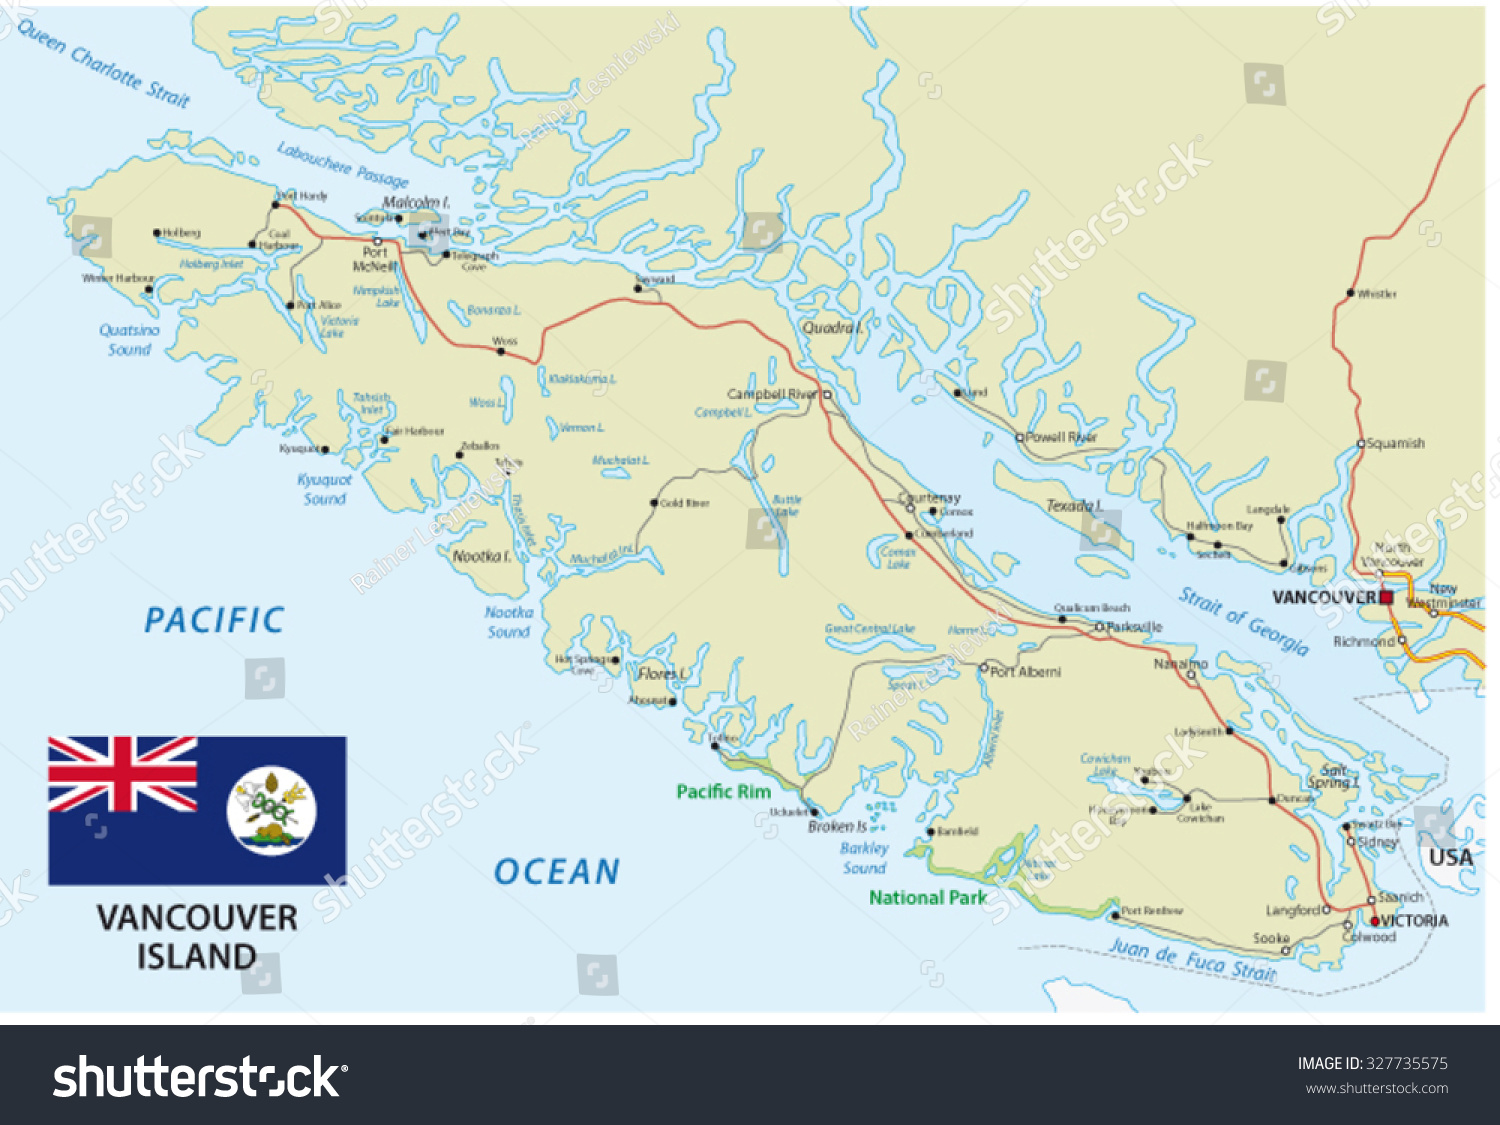 vancouver island road map Vancouver Island Road Map Flag Stock Vector Royalty Free 327735575 vancouver island road map